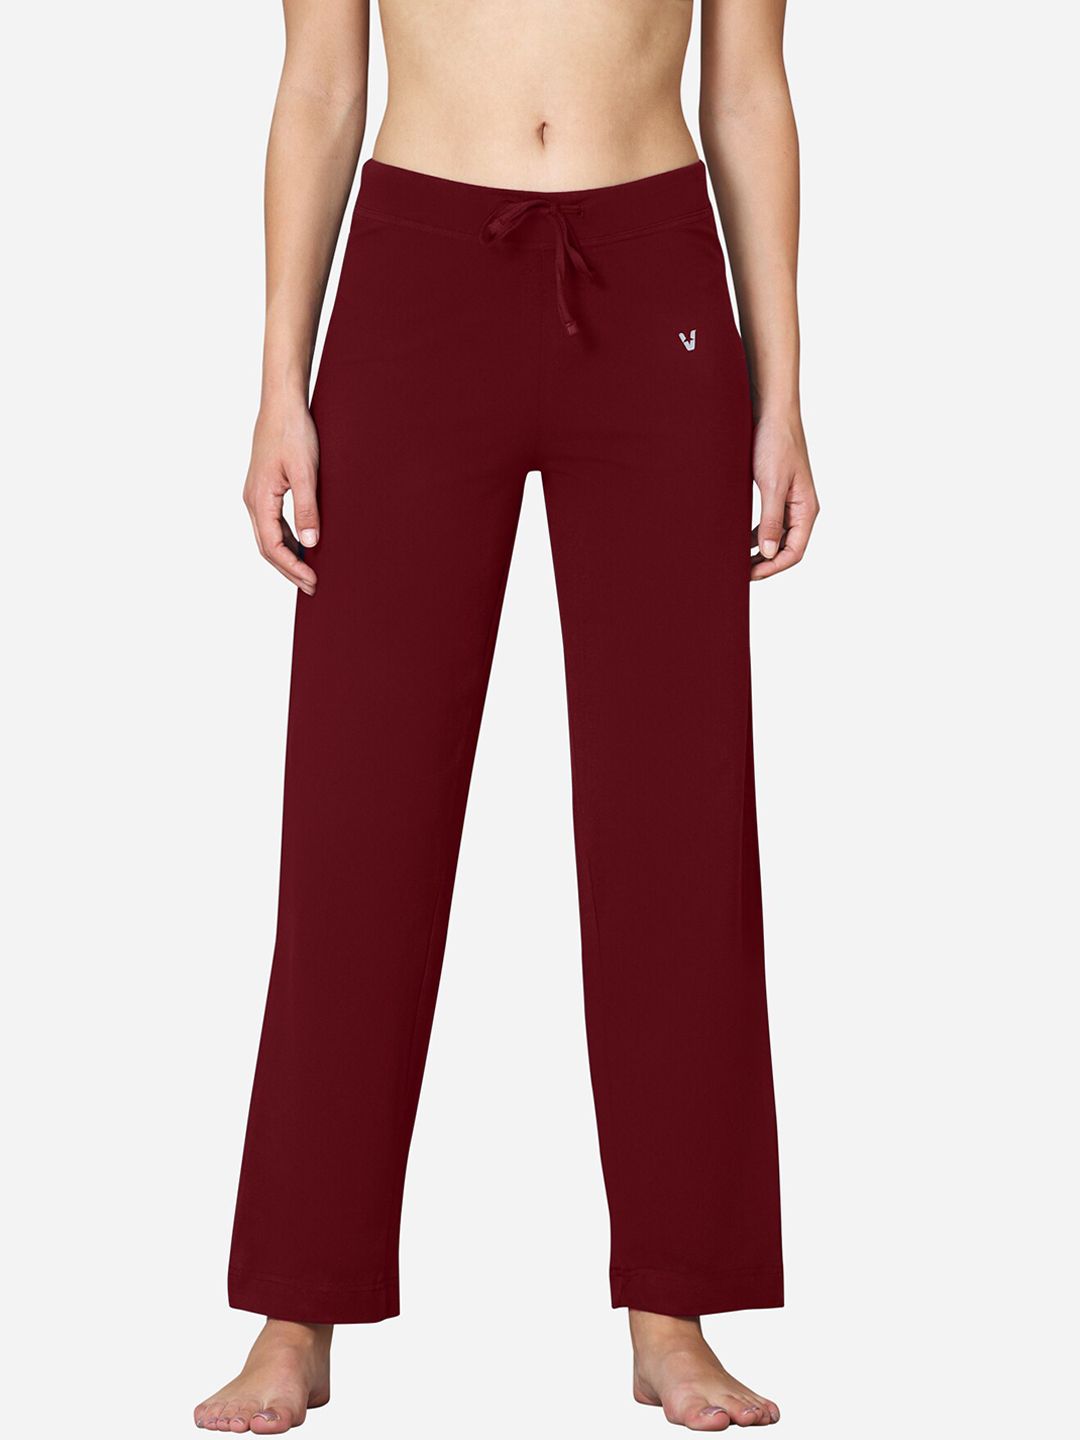 VStar Women Maroon Solid Cotton Lounge Pant Price in India